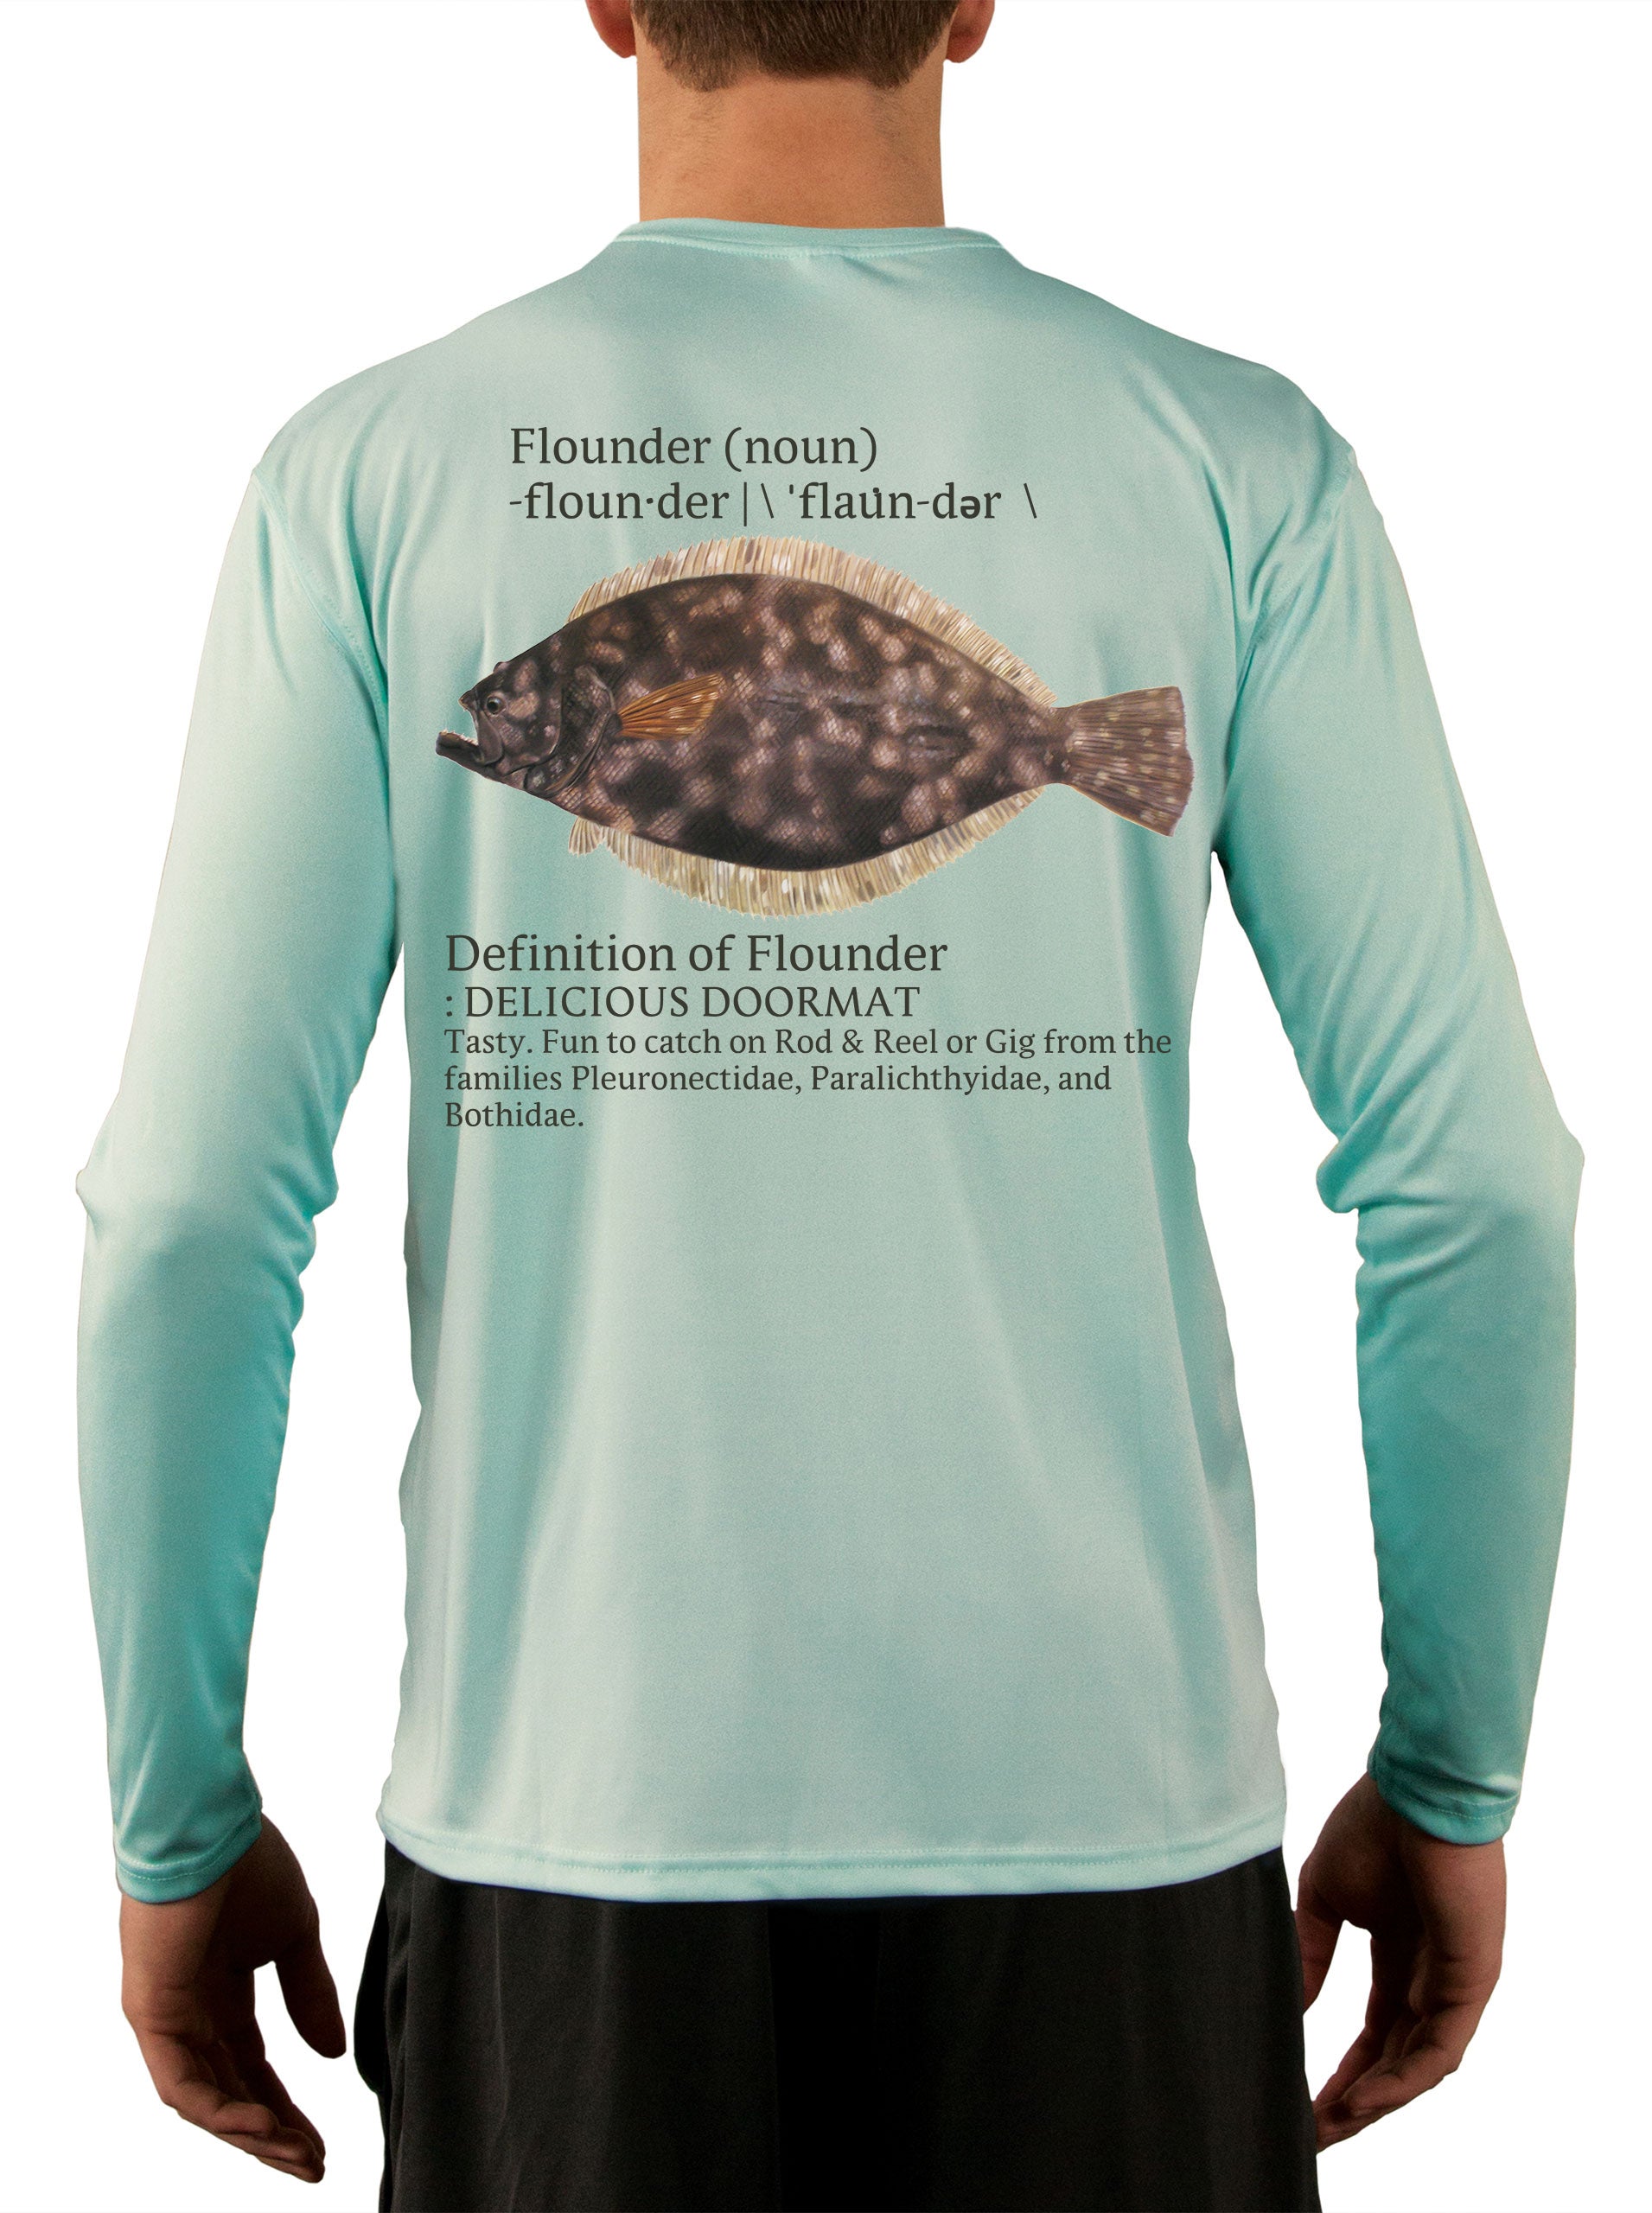 Flounder Fishing Shirts for Men Fluke - UV Protected +50 Sun Protection with Moisture Wicking Technology Large / Seagrass